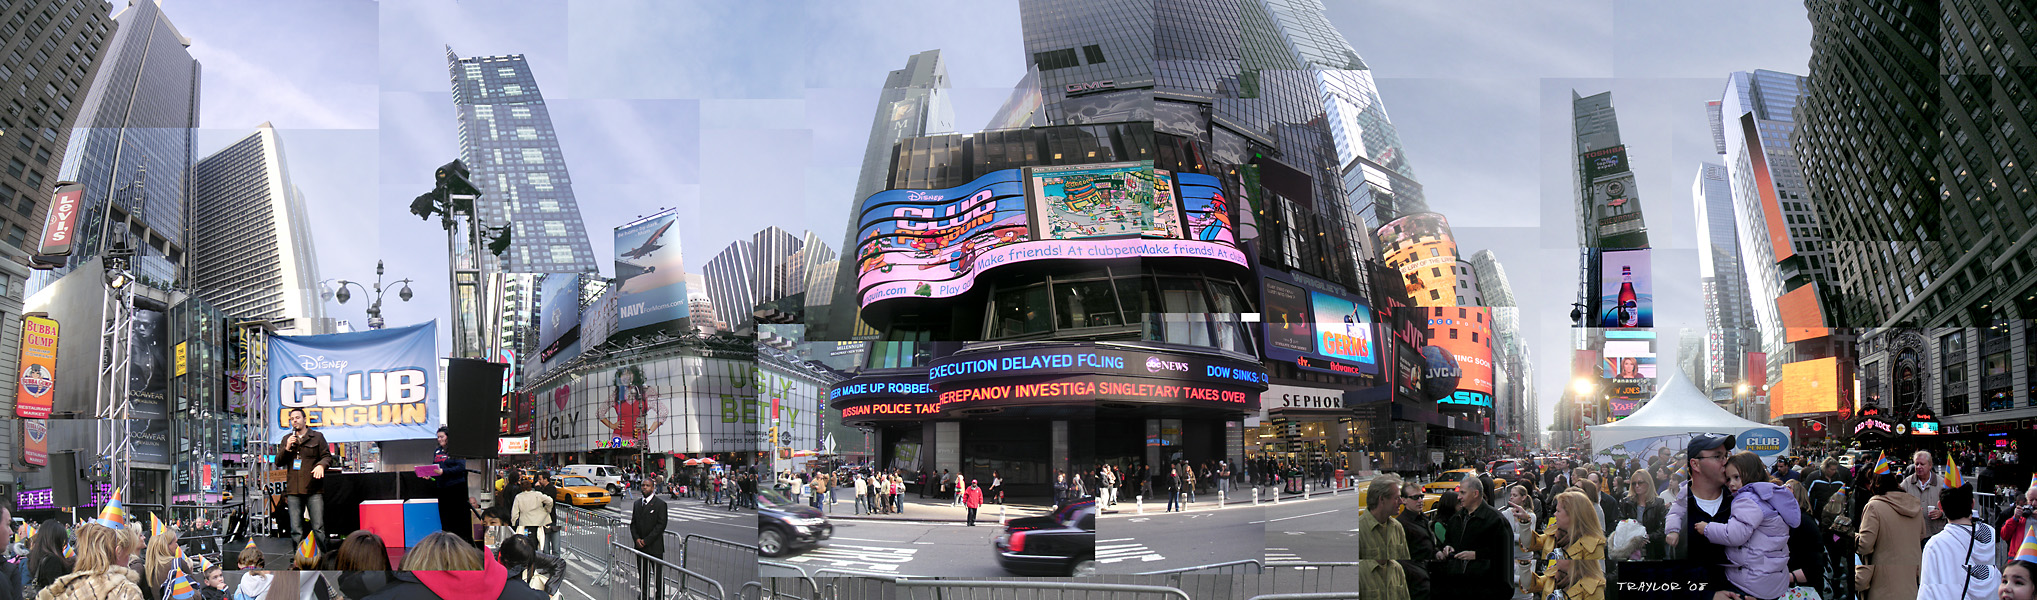 Panorama photo of Club Penguin celebrating their 3rd anniversary in the middle of Times Square